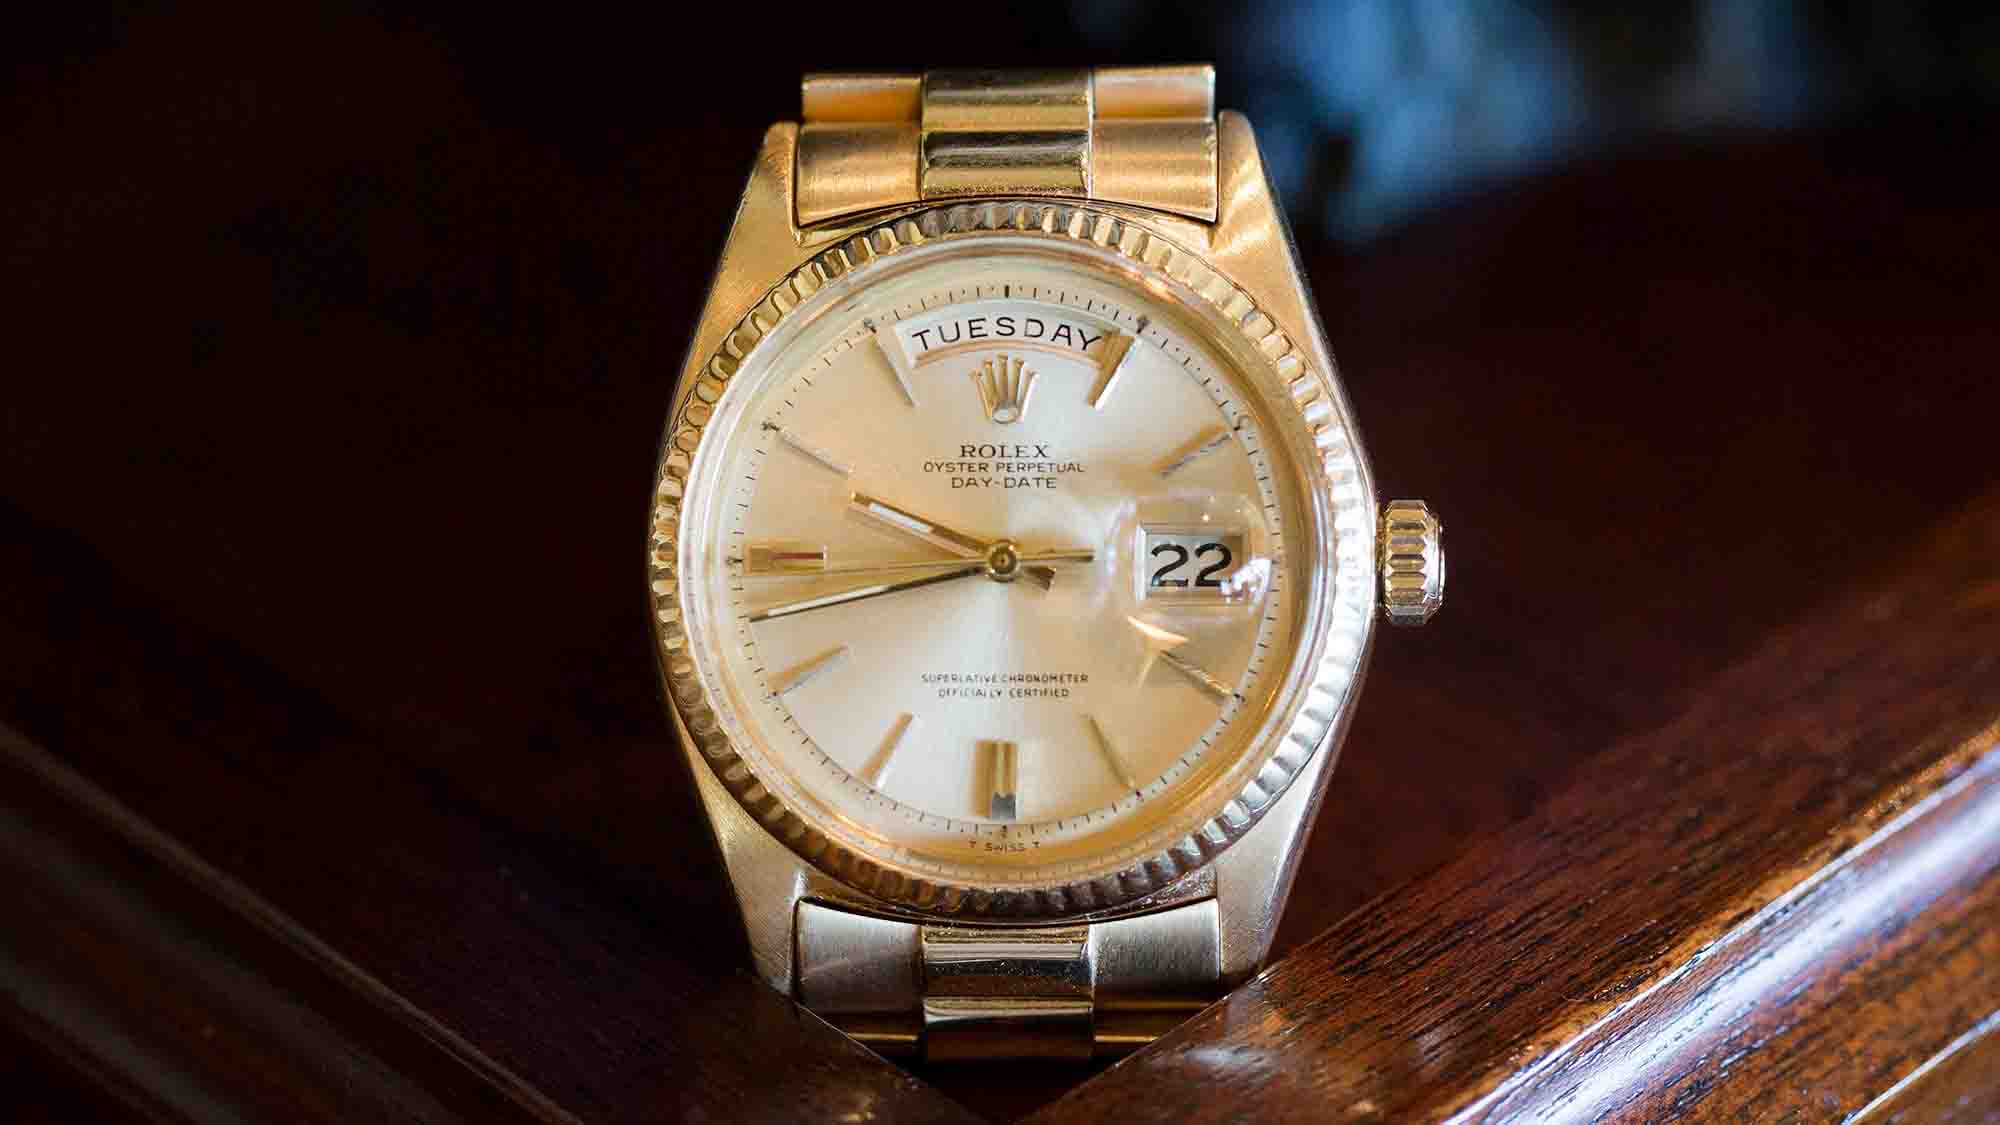 Jack Nicklaus's Rolex Day-Date 